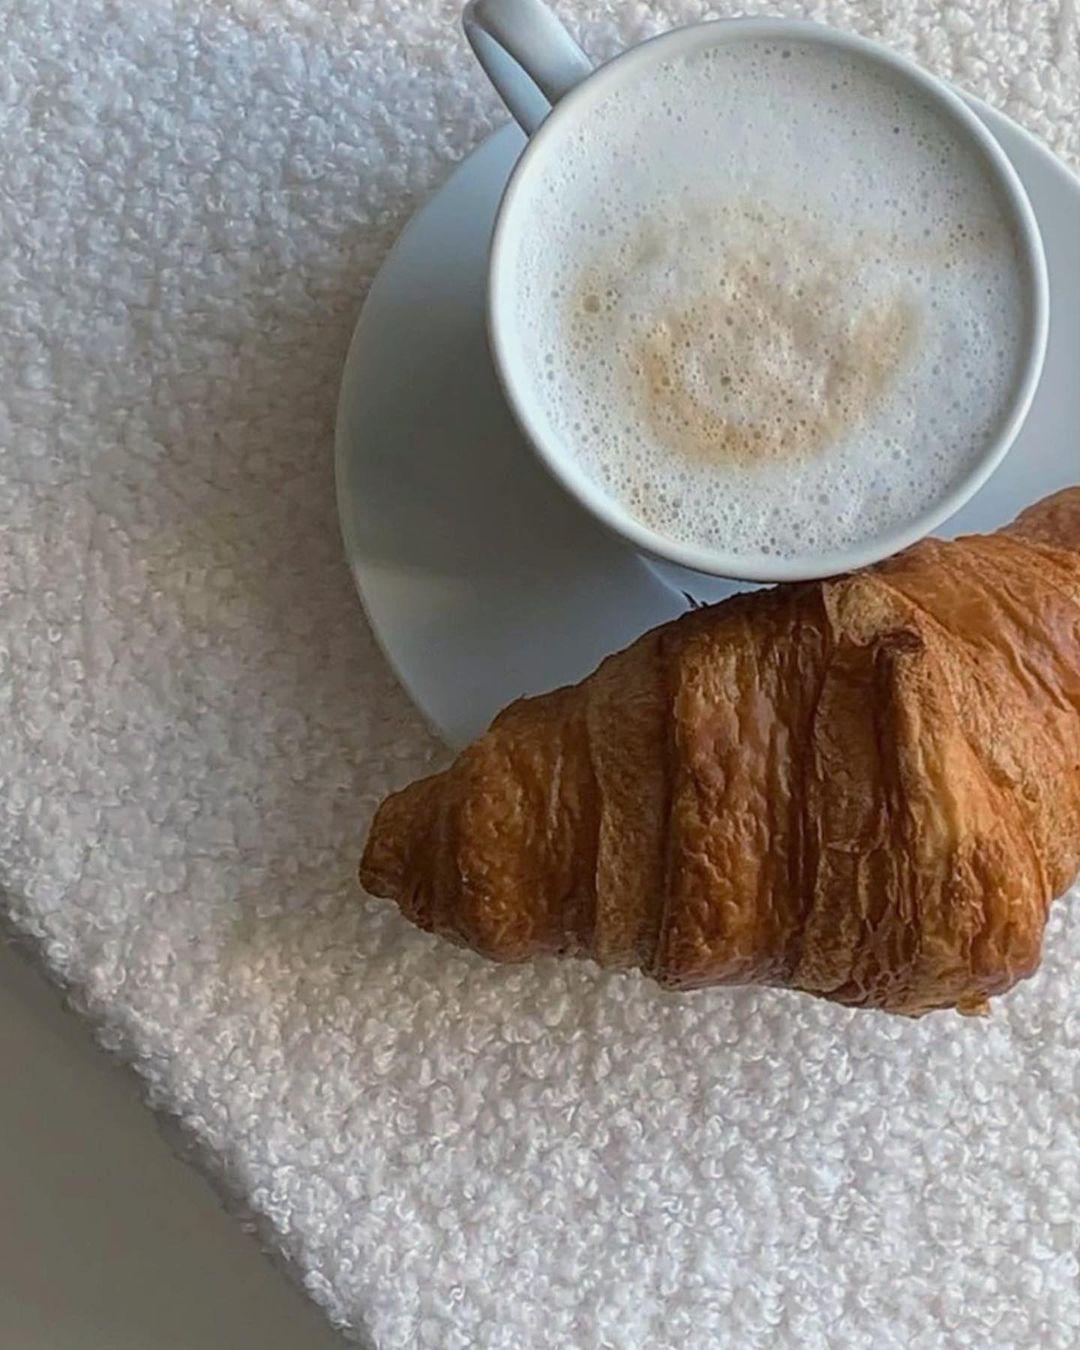 class="content__text"
 Breakfast is served. 🥐 
 